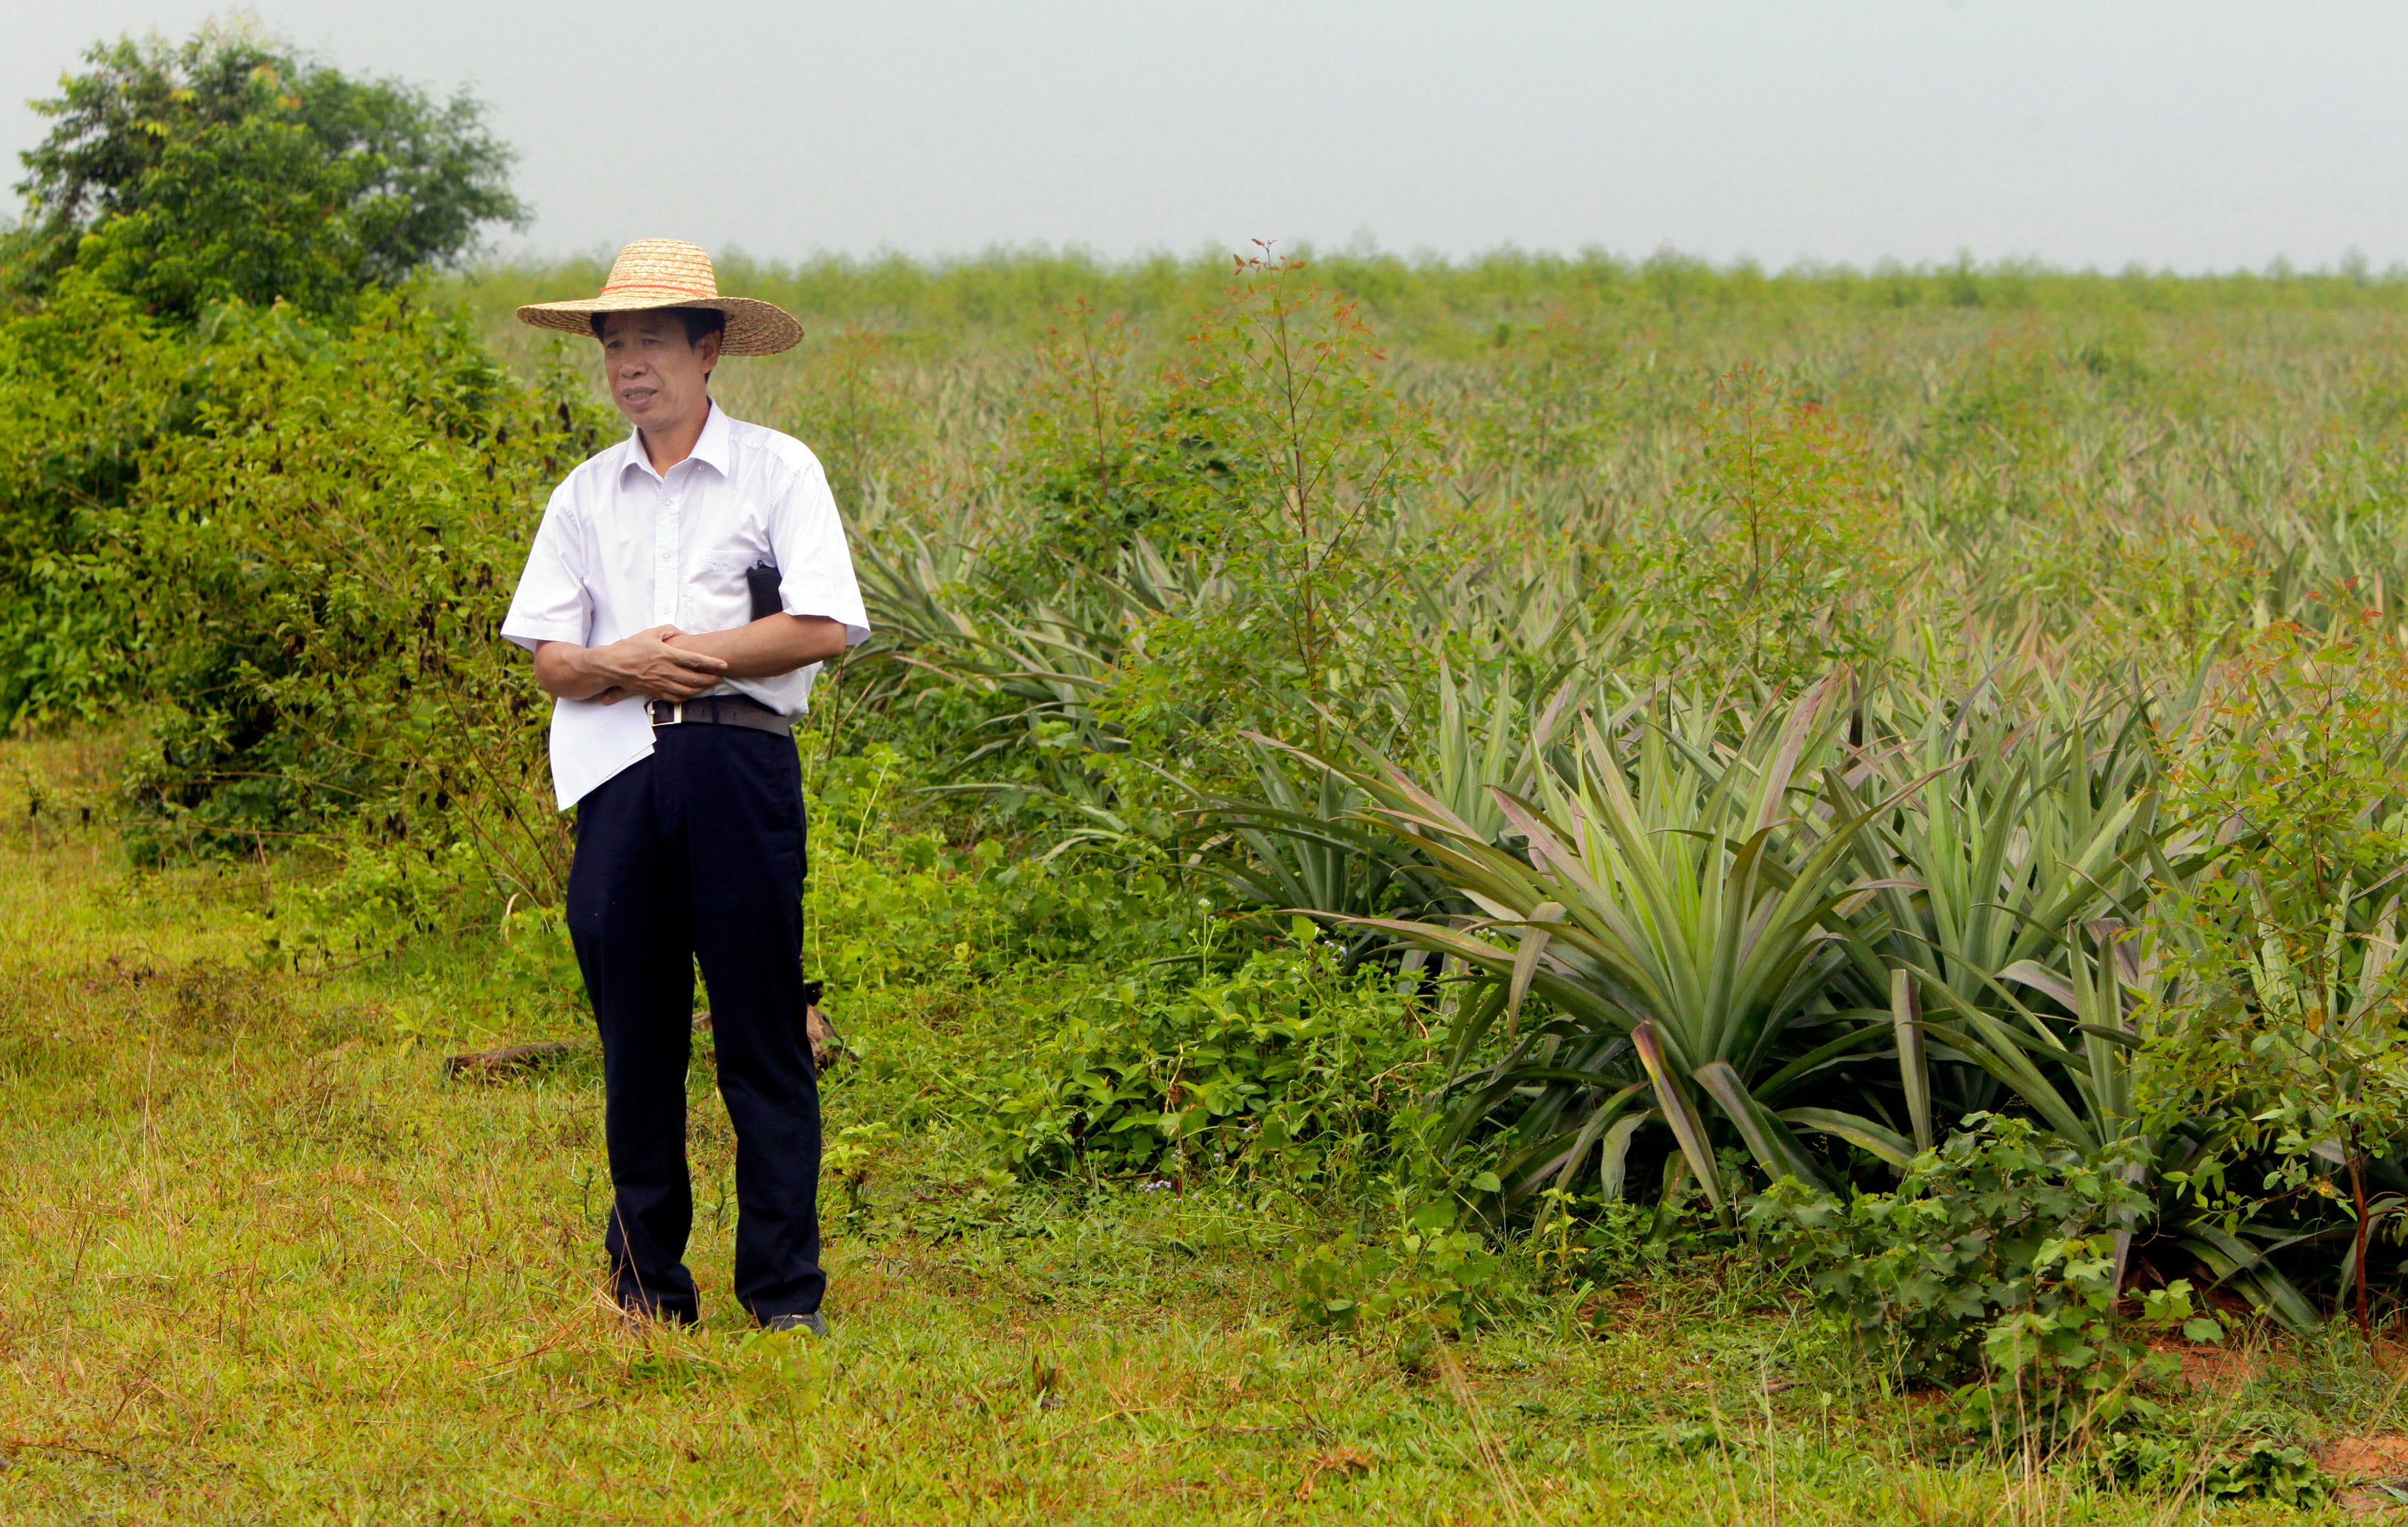 Dr. Wending Haung, deputy CEO APP (Asia Pulp and Paper) China Forestry, stands next to a three-month old eucalyptus tree (to Haung's immediate right) at a plantation near Long Hu Zhen Gao Mei Hainan located in the Hainan provence, a tropical part of China.